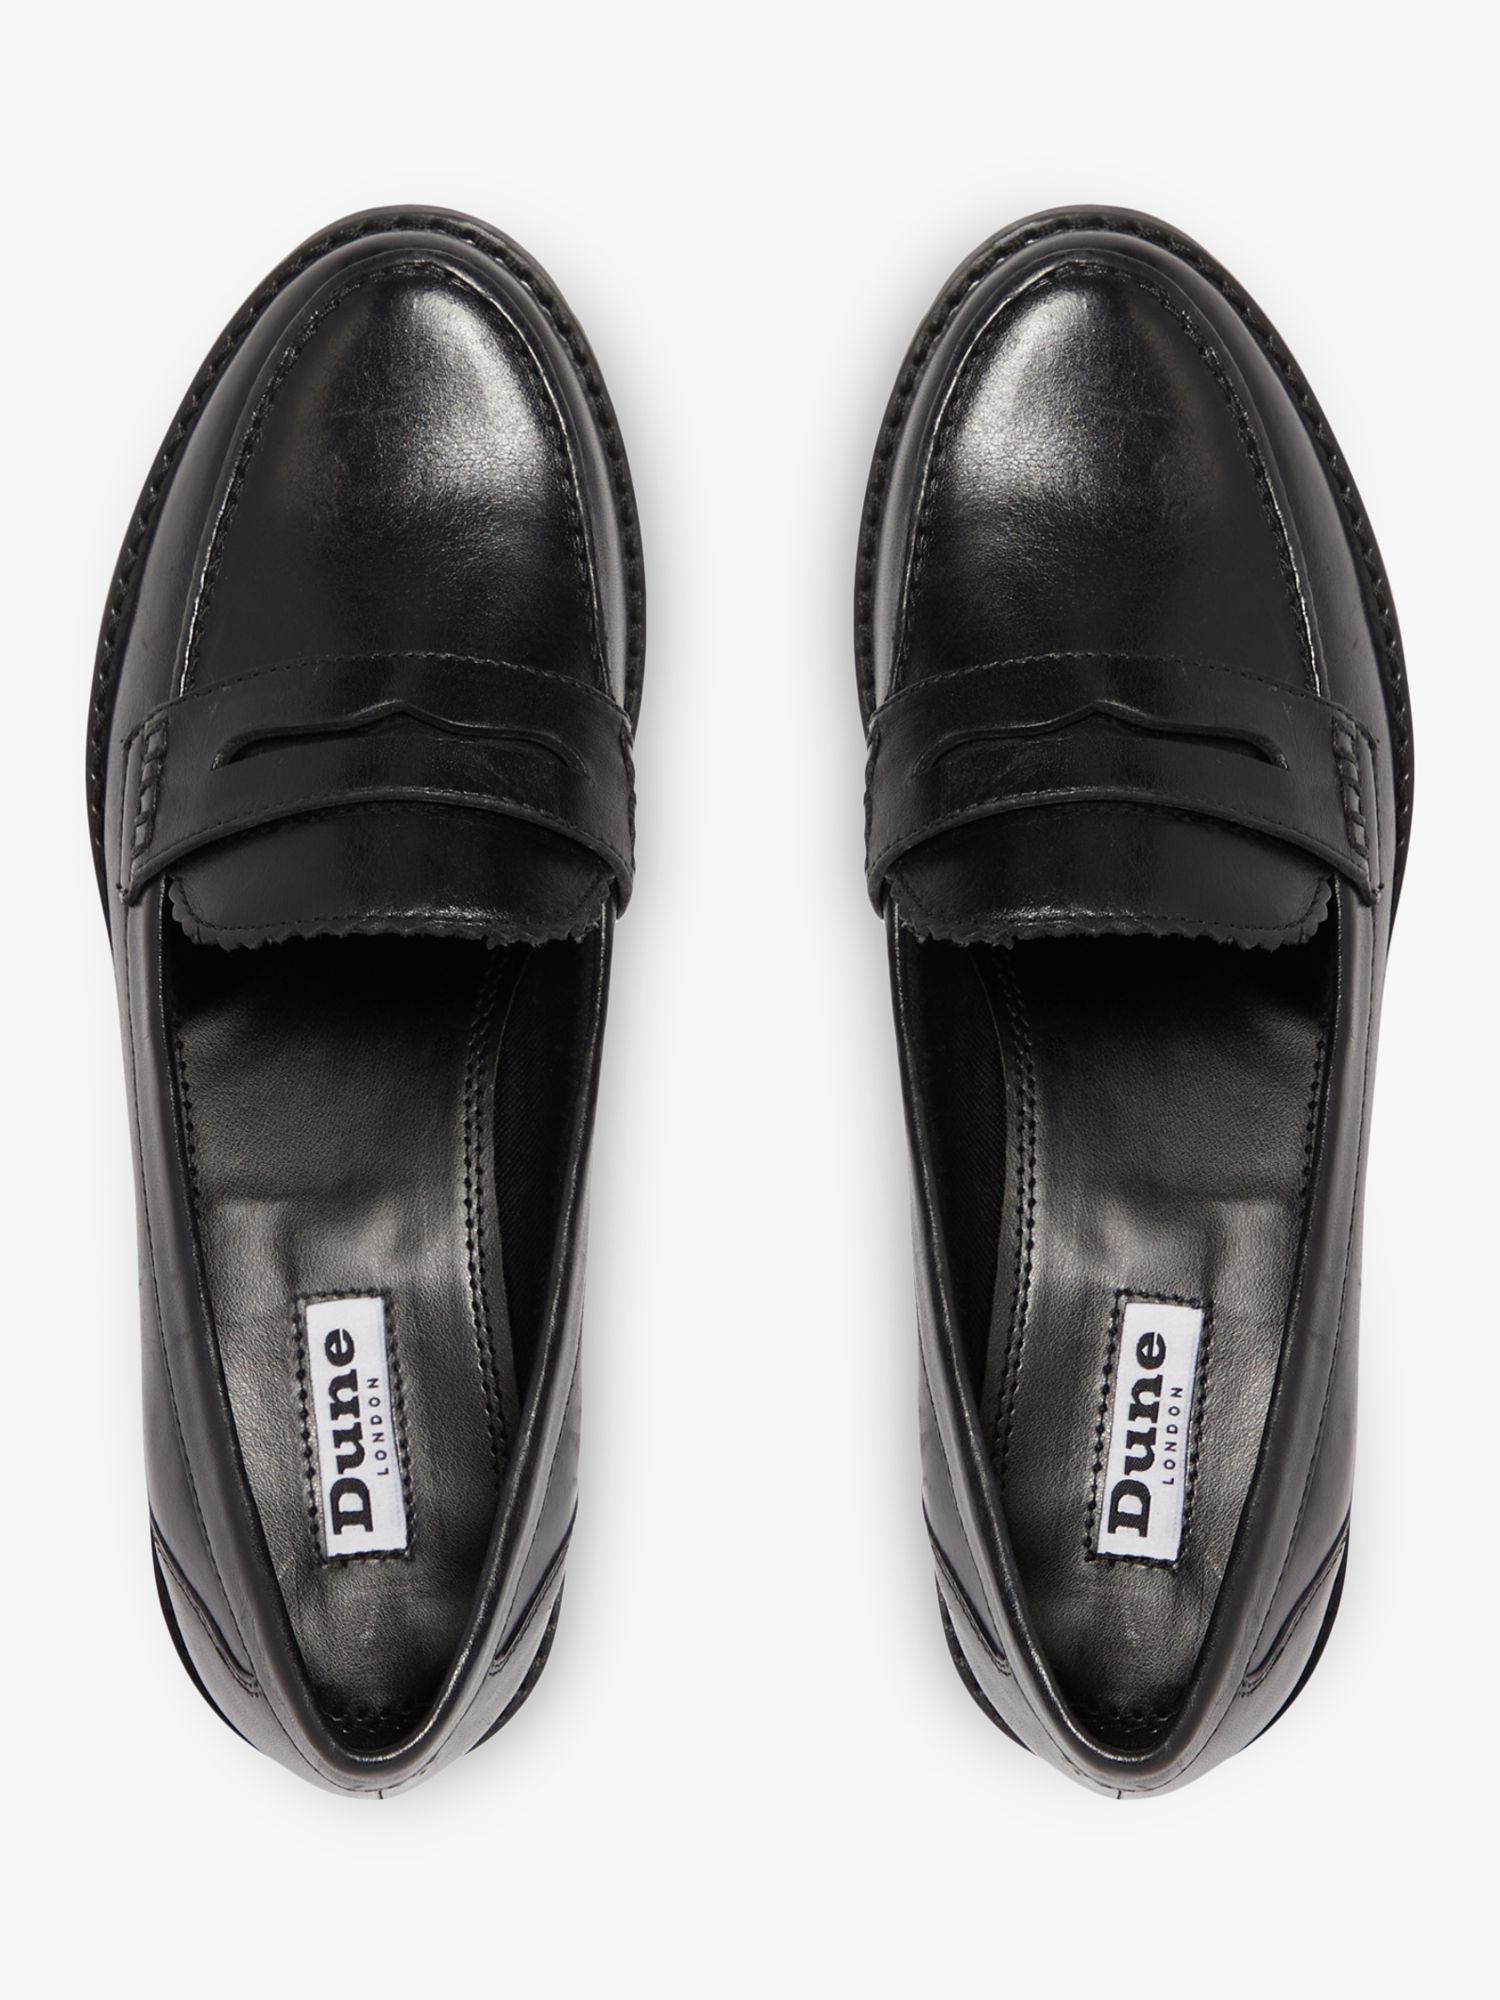 Dune Glintts Leather Loafers, Black at John Lewis & Partners